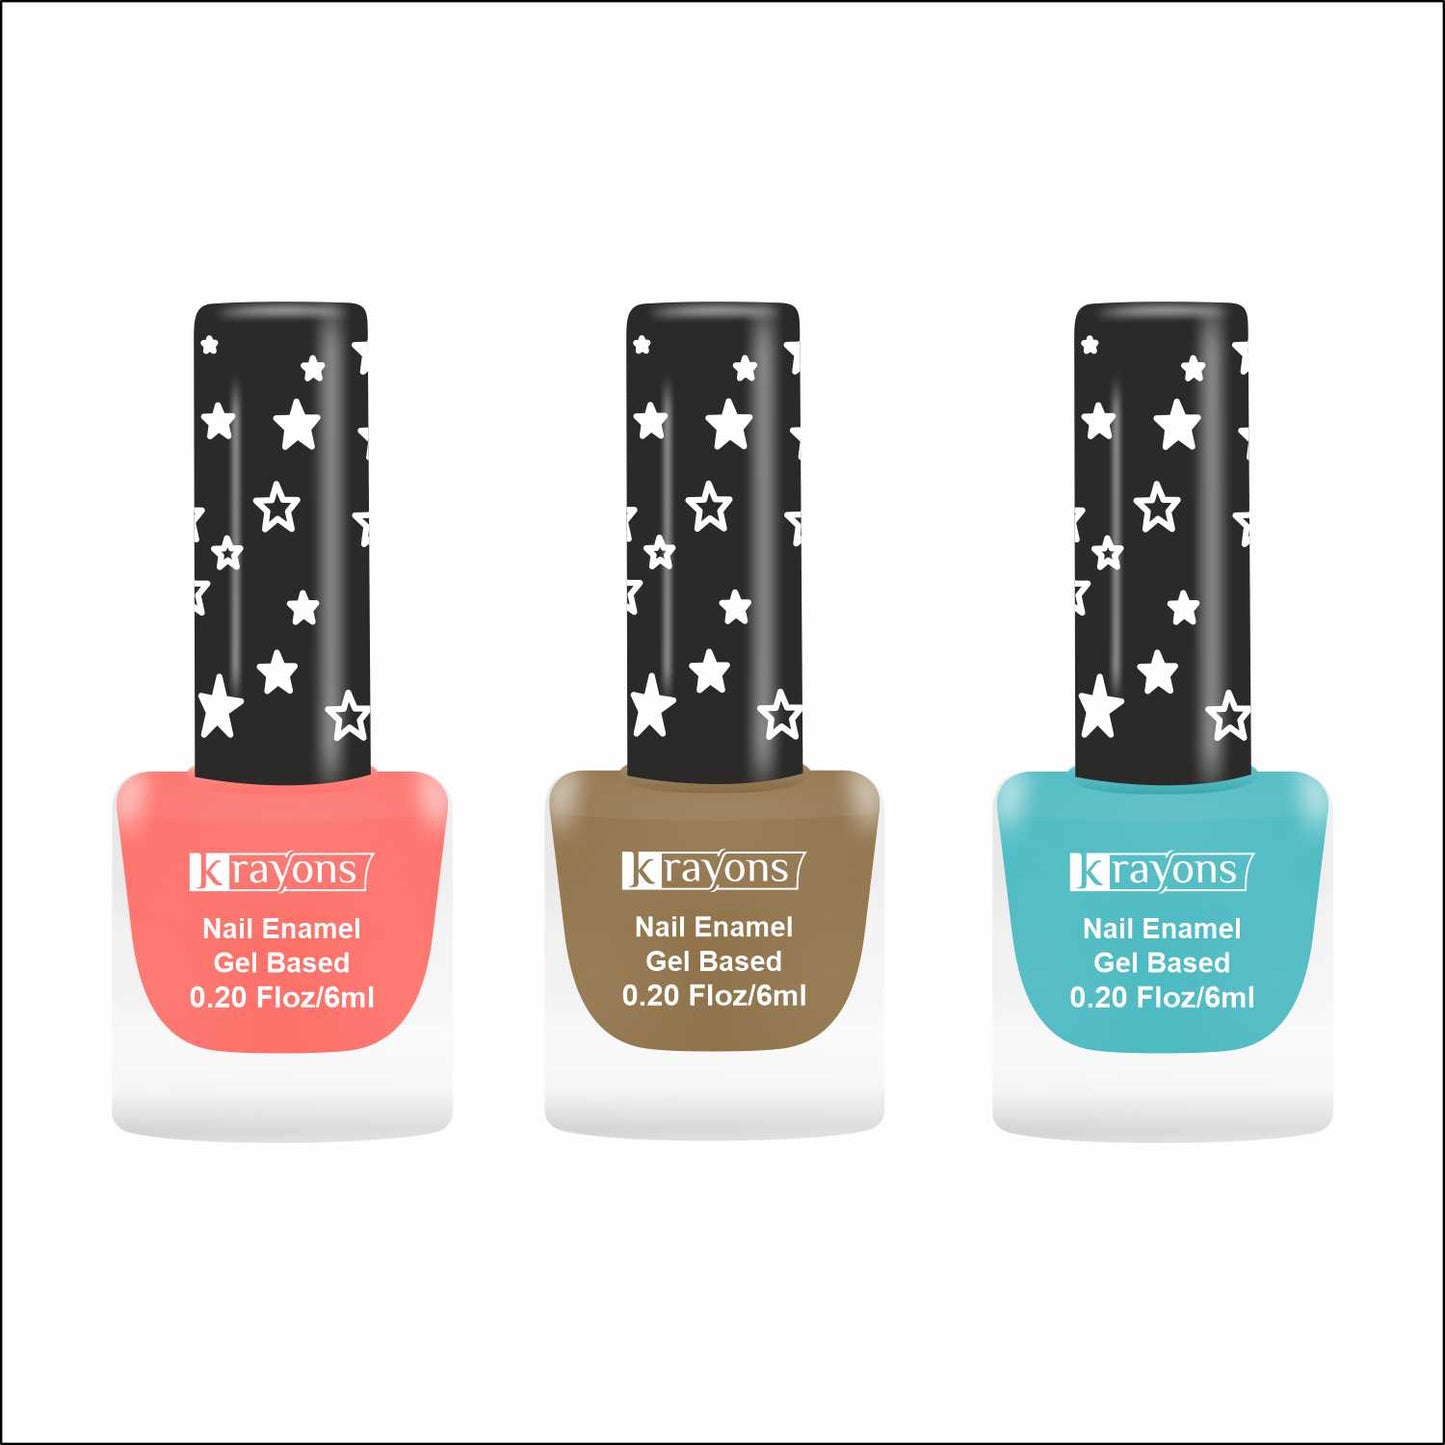 Krayons Cute Super Matte Finish Nail Enamel, Quick Dry, LongLasting, Blossom Peach, Nude Beige, Cyan Matte, 6ml Each (Pack of 3)